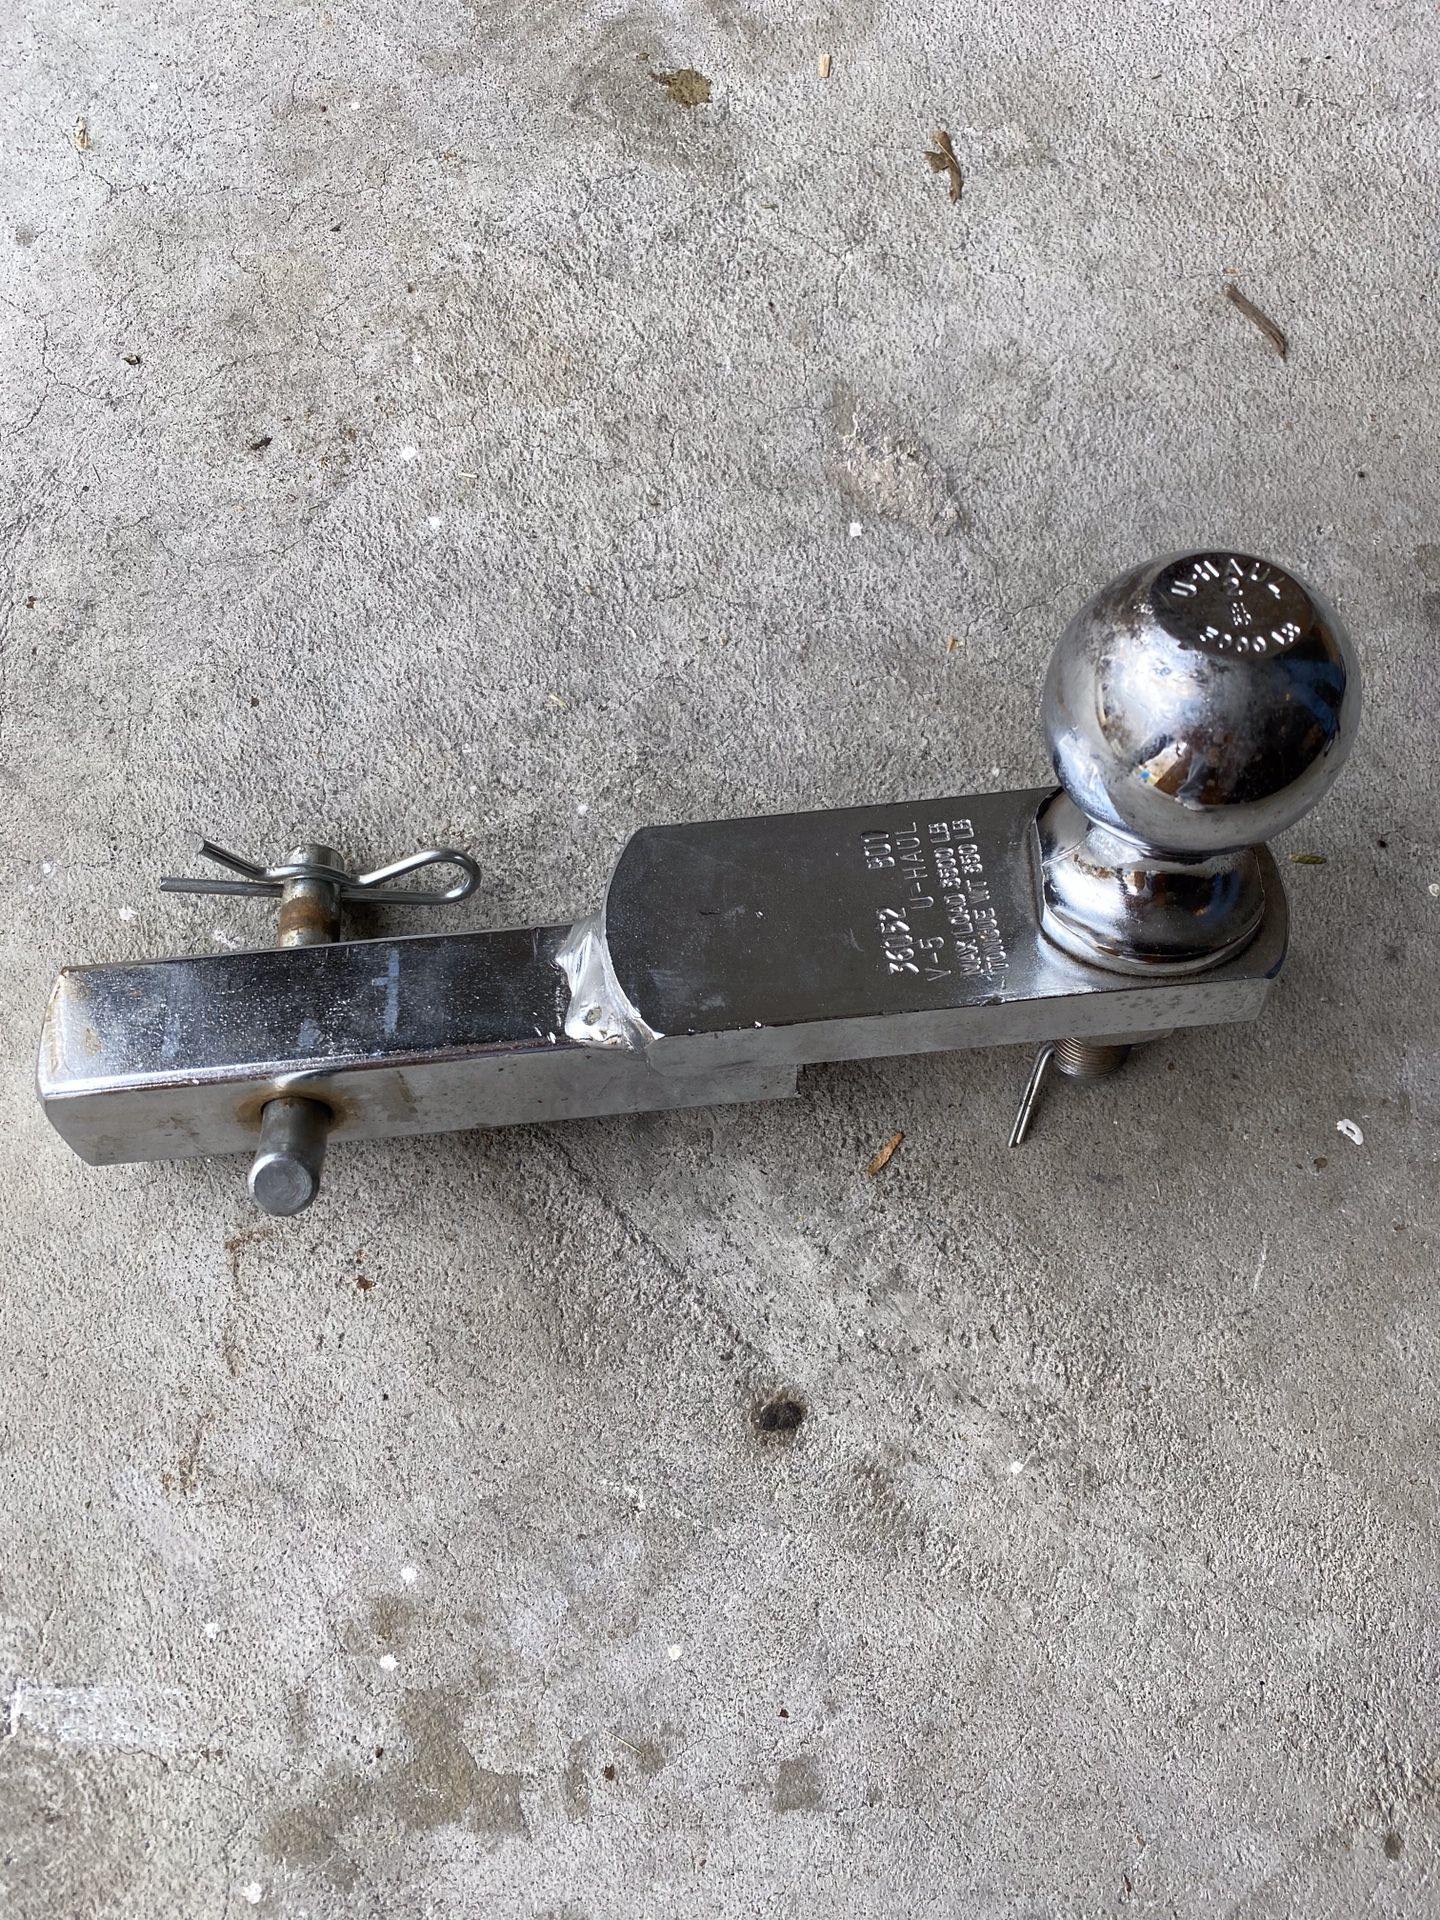 Trailer Hitch Ball - Used Once!